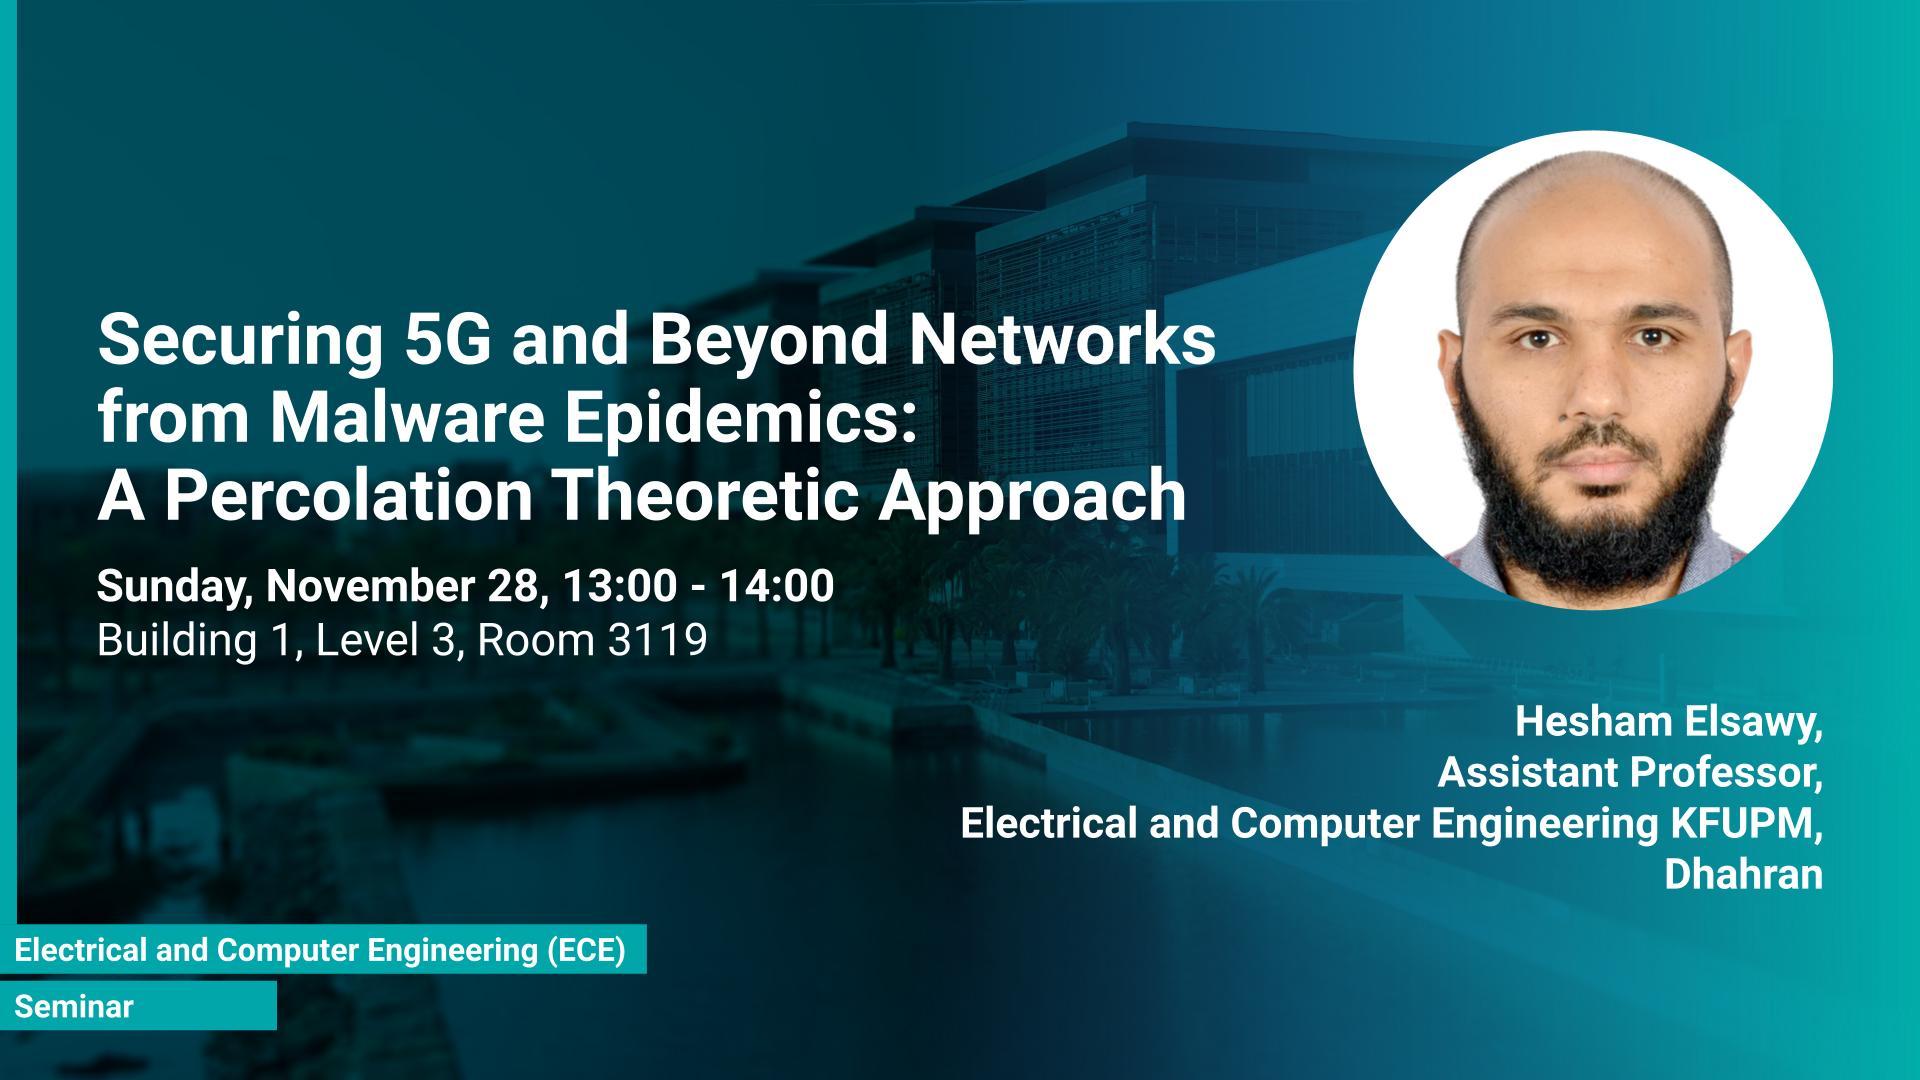 KAUST CEMSE ECE Hesham Elsawy Securing 5G and Beyond Networks from Malware Epidemics: A Percolation Theoretic Approach